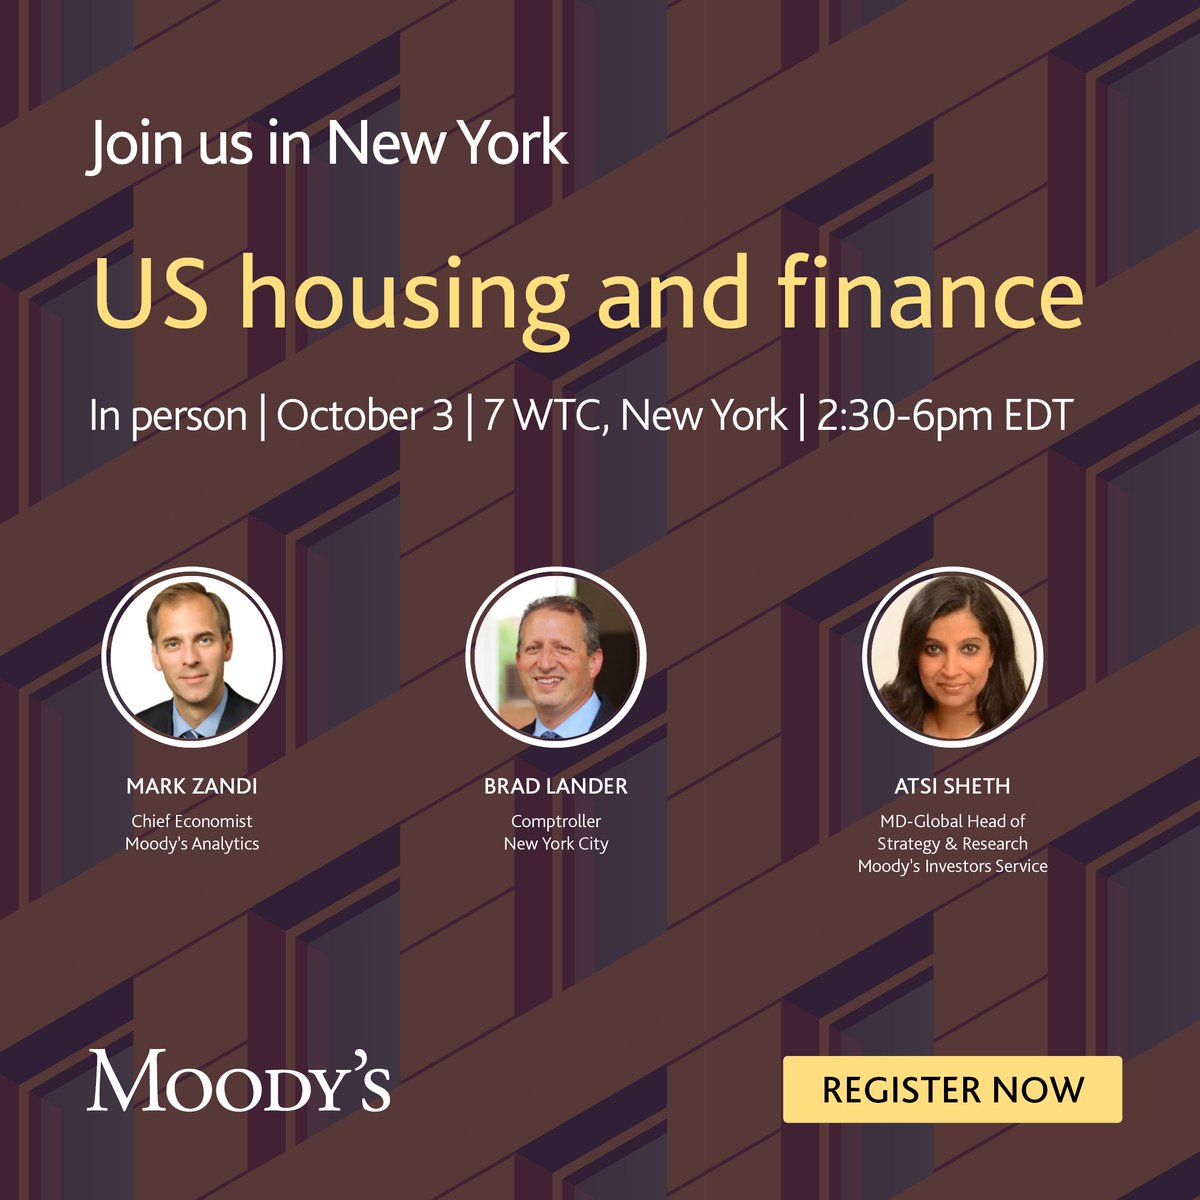 Join our US Housing & Housing Finance fall briefing and networking event on Tuesday 3 October in person in New York. Explore key issues and prospects for real estate and the broader economy. 👉 See the full agenda and register here: events.moodys.com/2023-10-mcu204…